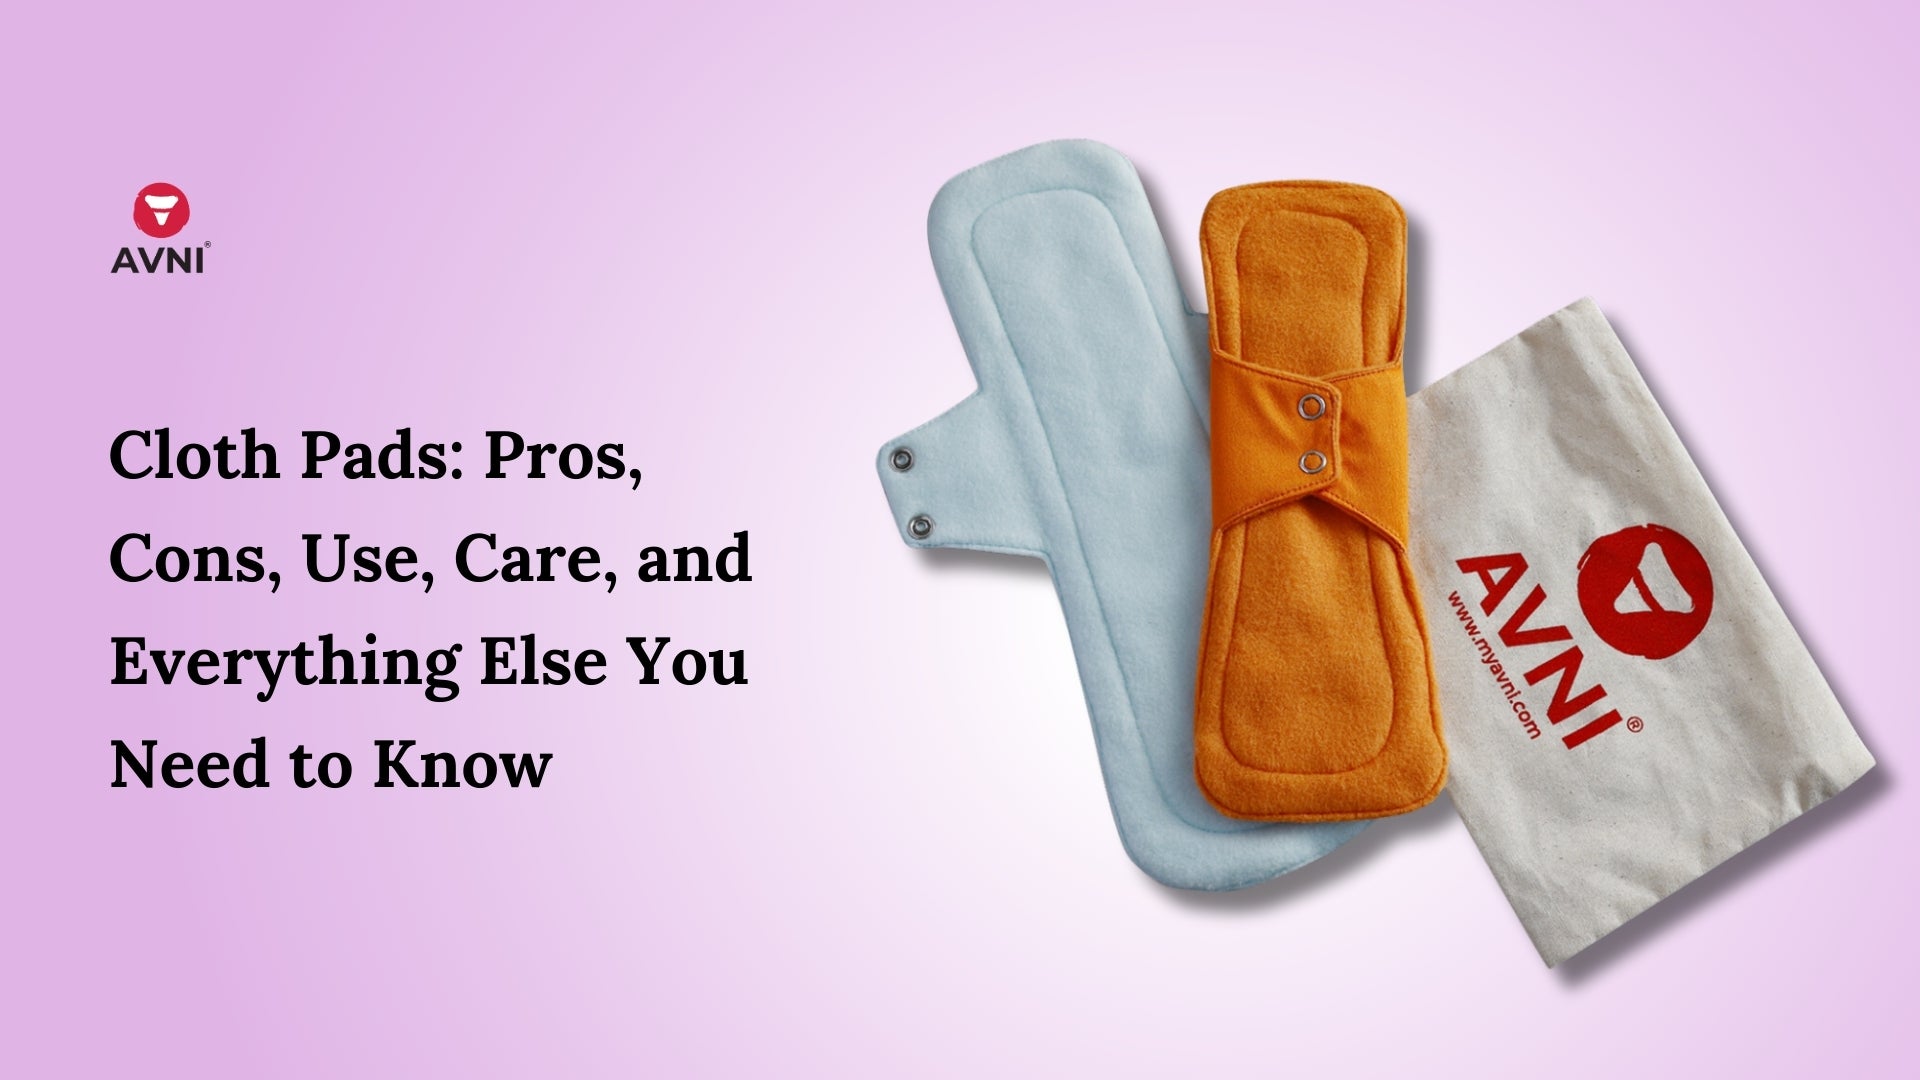 Cloth Pads: Pros, Cons, Use, Care, and Everything Else You Need to Know